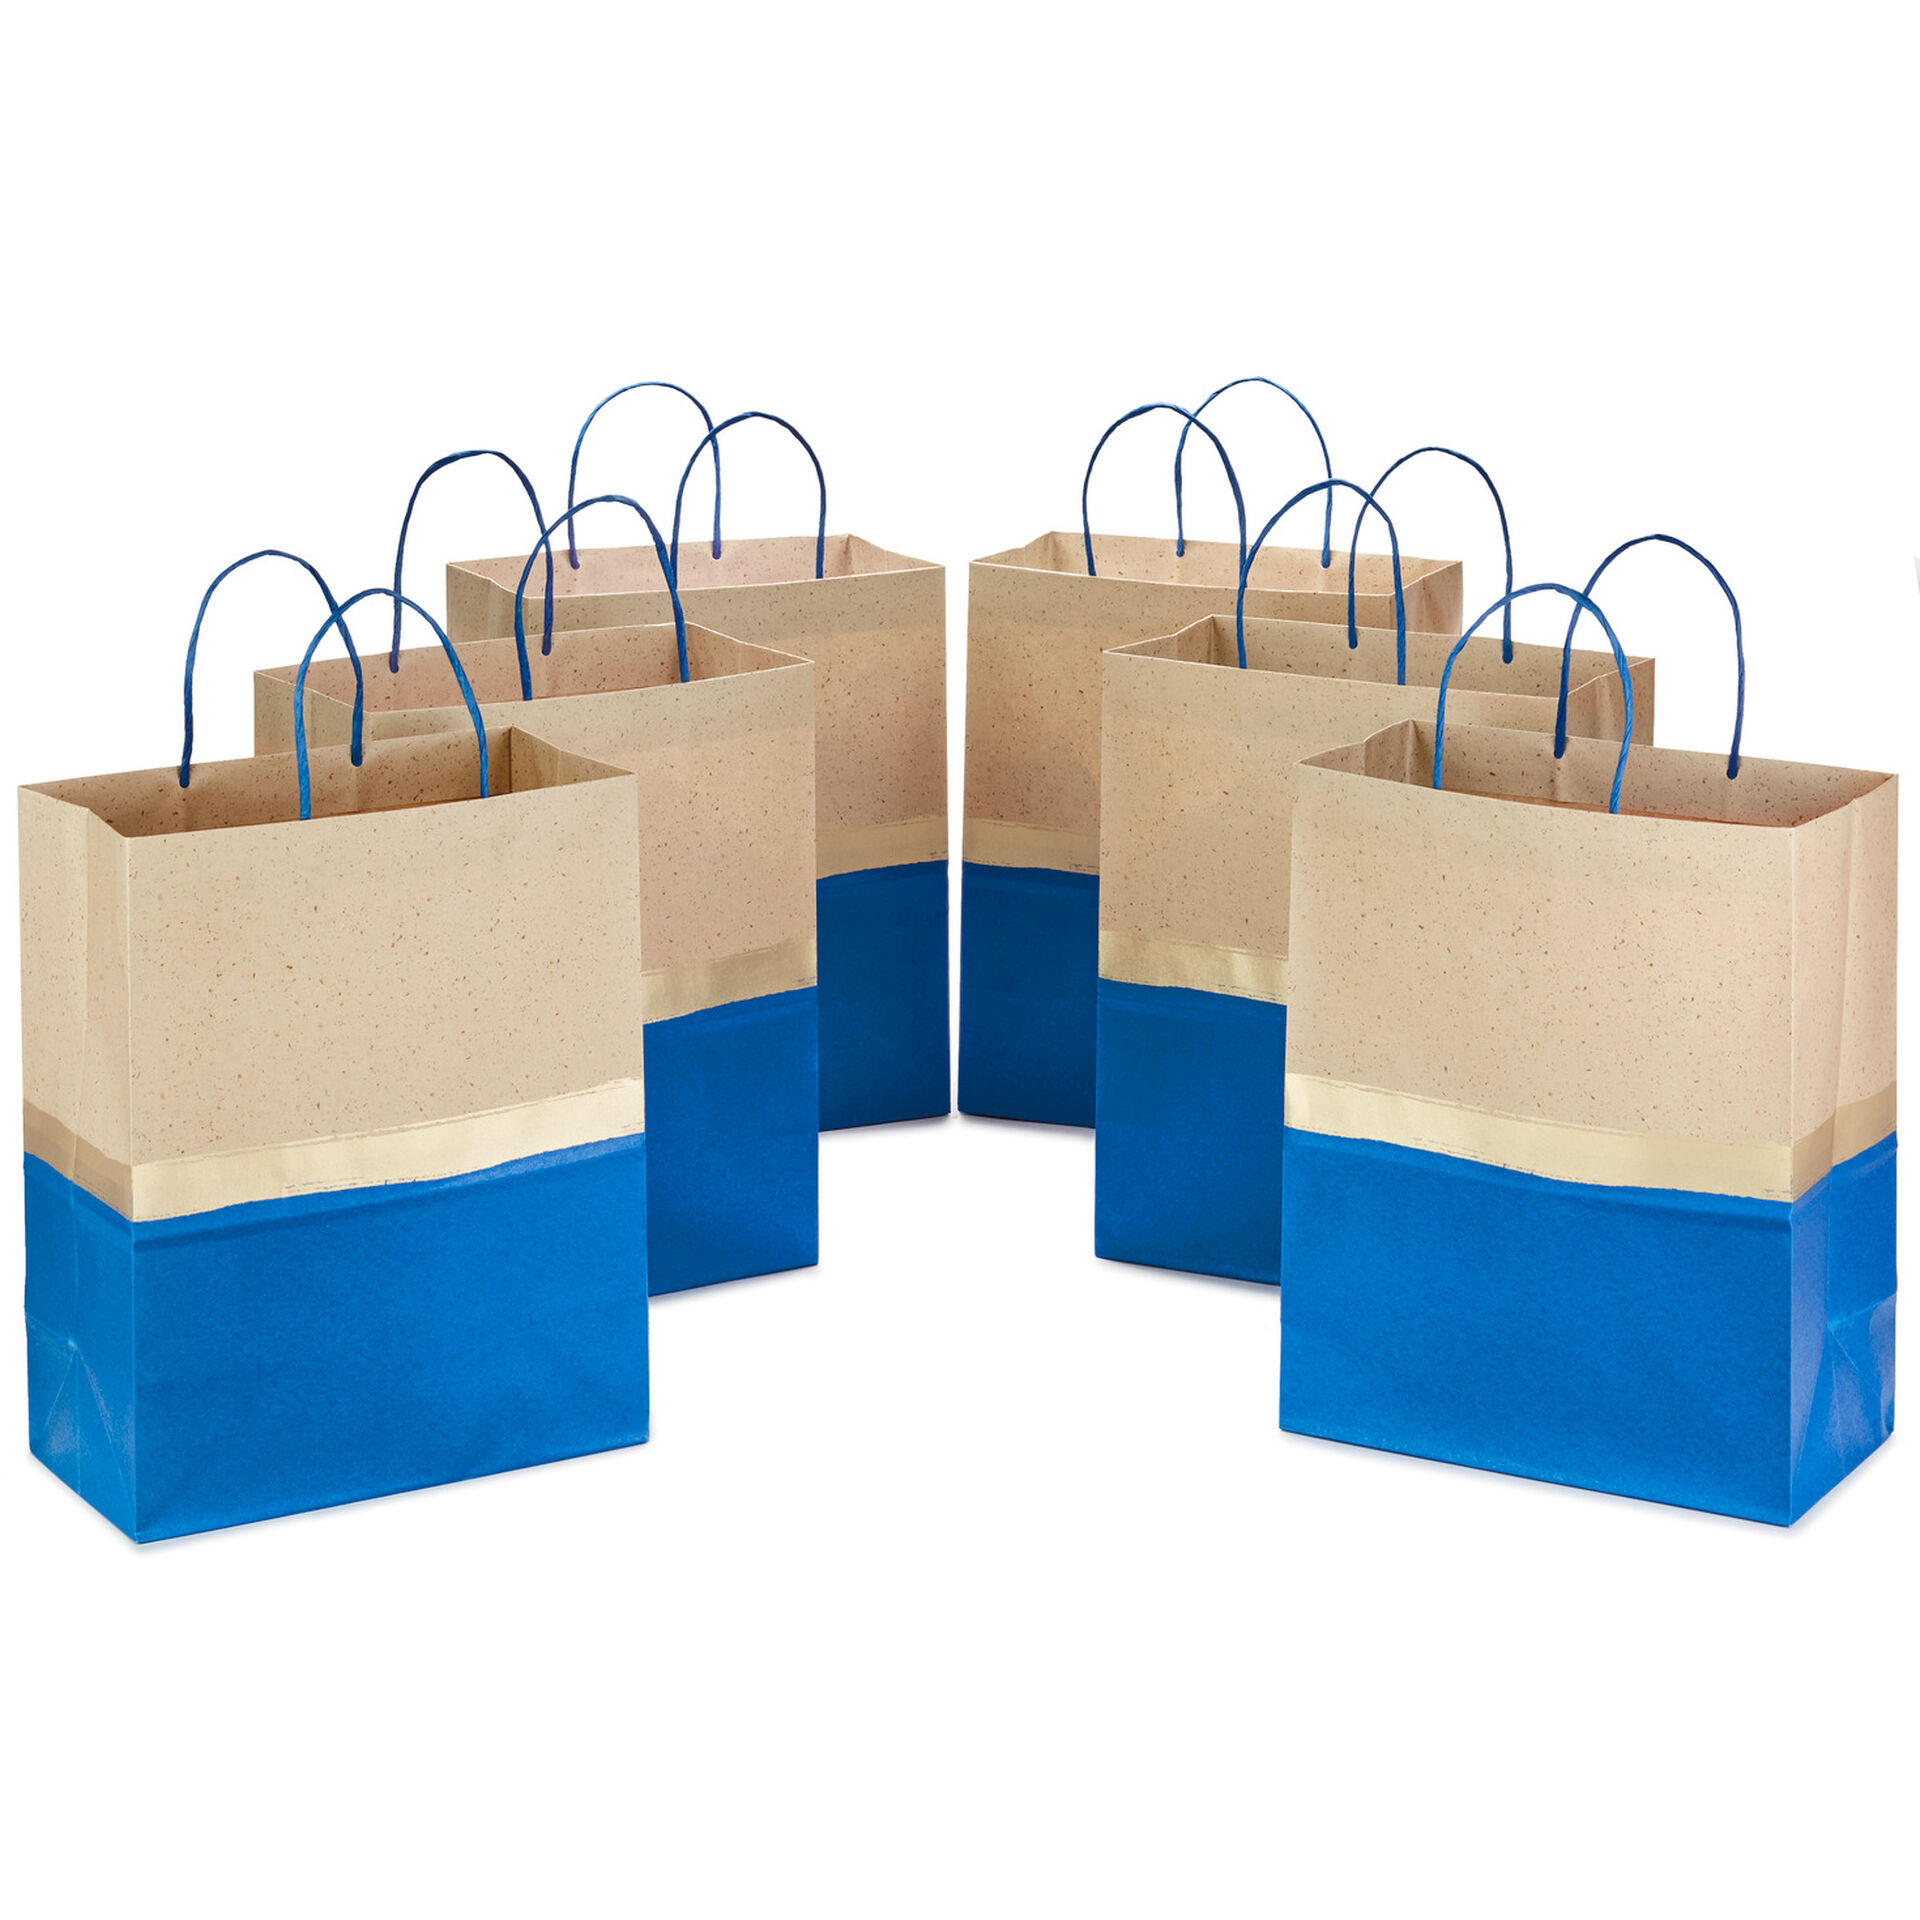 Holidays and All Occasions Multiple Sizes Prime Time Packaging Ltd Weddings 250 Count| Perfect for Birthdays 5.75 x 3.25 x 8.3 Natural Kraft Paper Gift Tote Bags PTP White or Natural Colors 